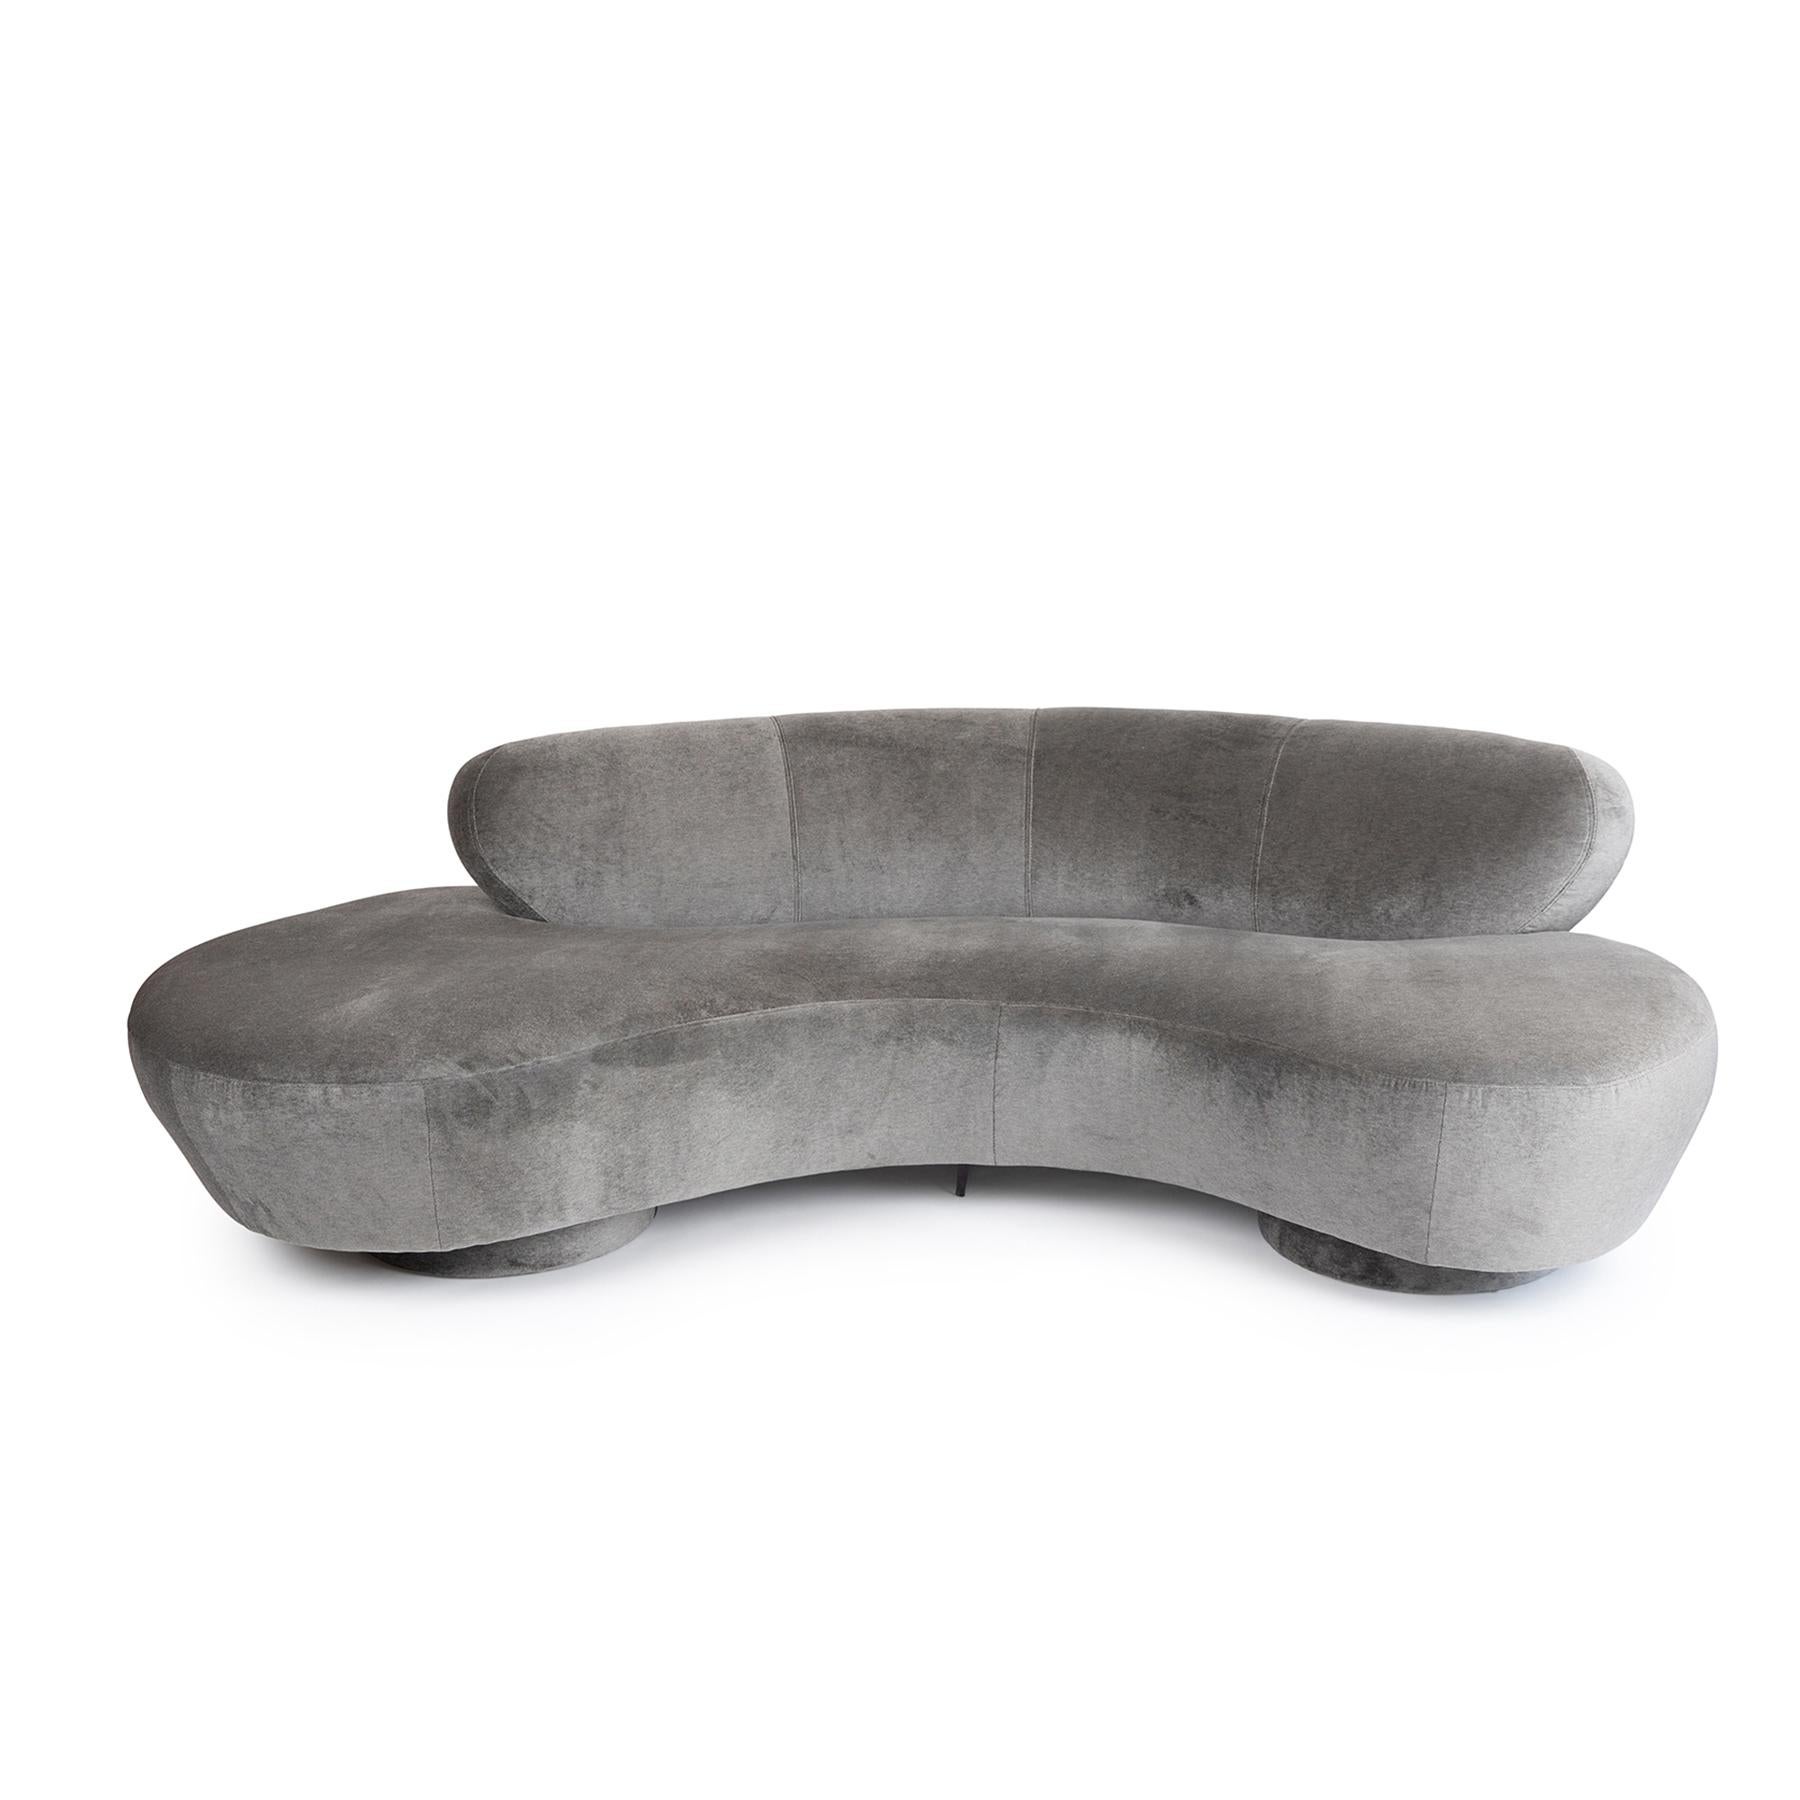 Stunning Serpentine sofa by Vladimir Kagan for Directional in shimmery light grey Sunbrella. The sofa has been newly upholstered and retains the Directional label.